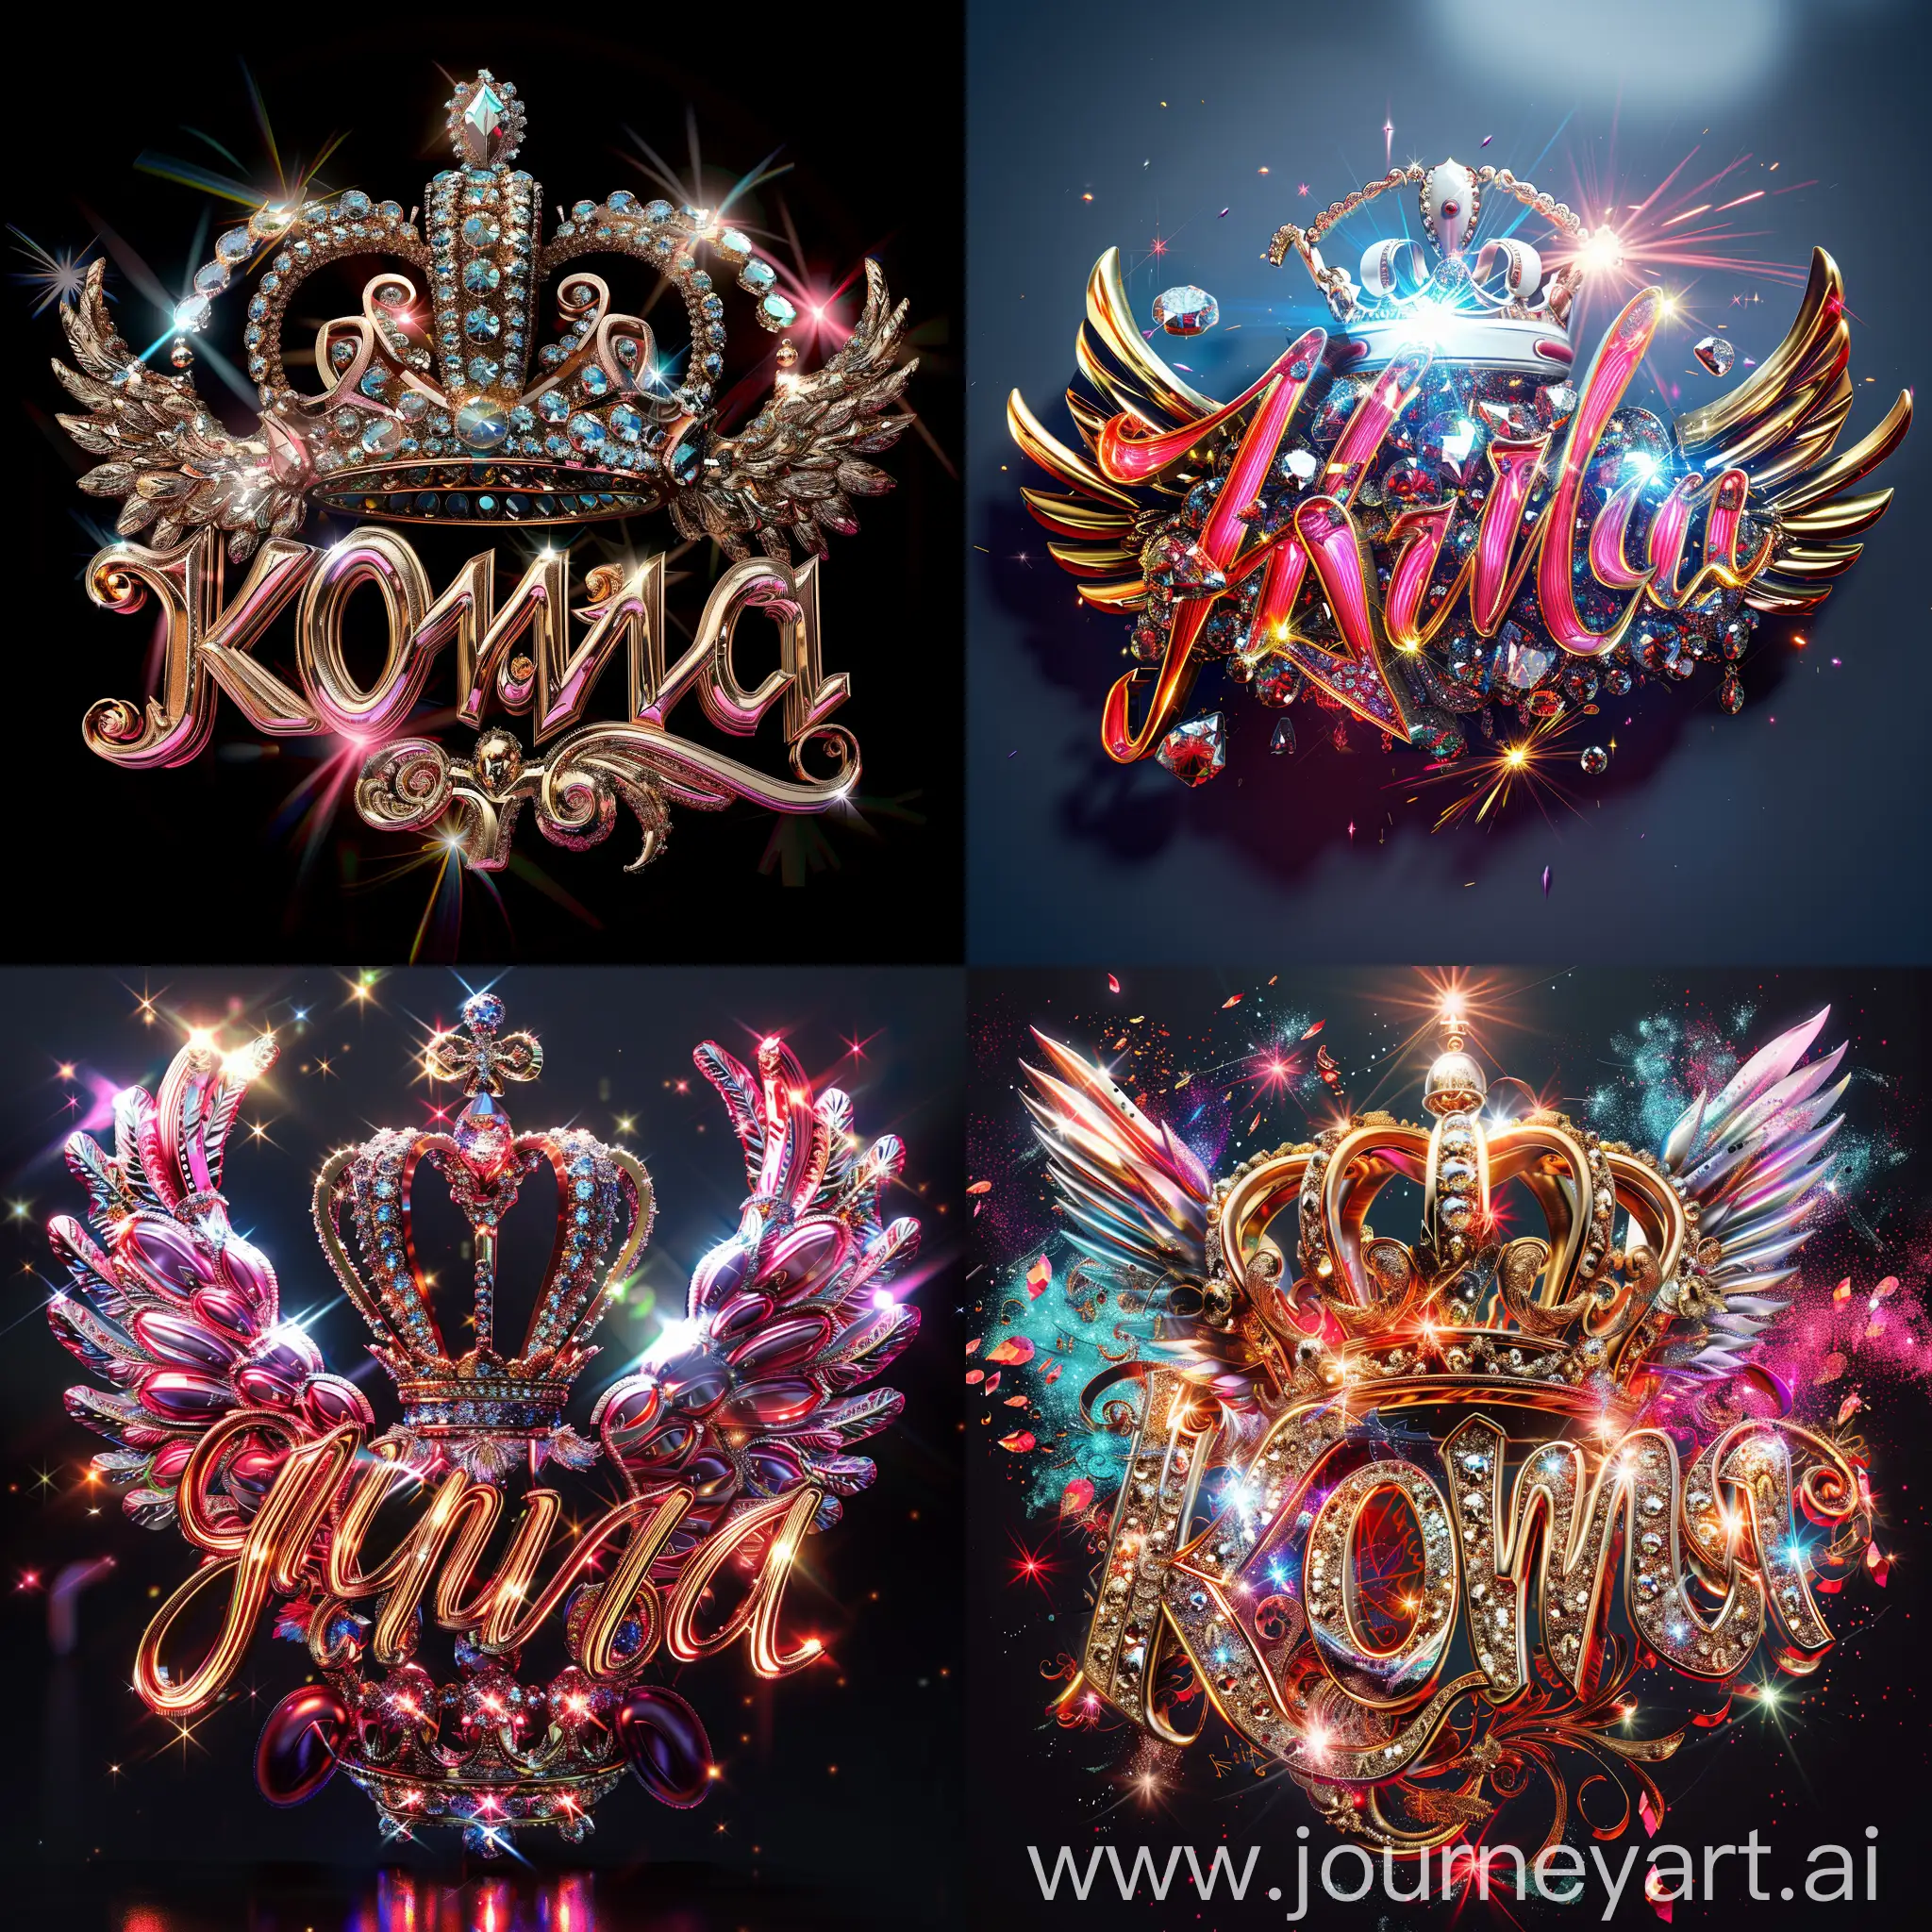 Elegant-3D-Typography-KONE-FATIMA-LALIBANAISE-with-Crown-and-Diamonds